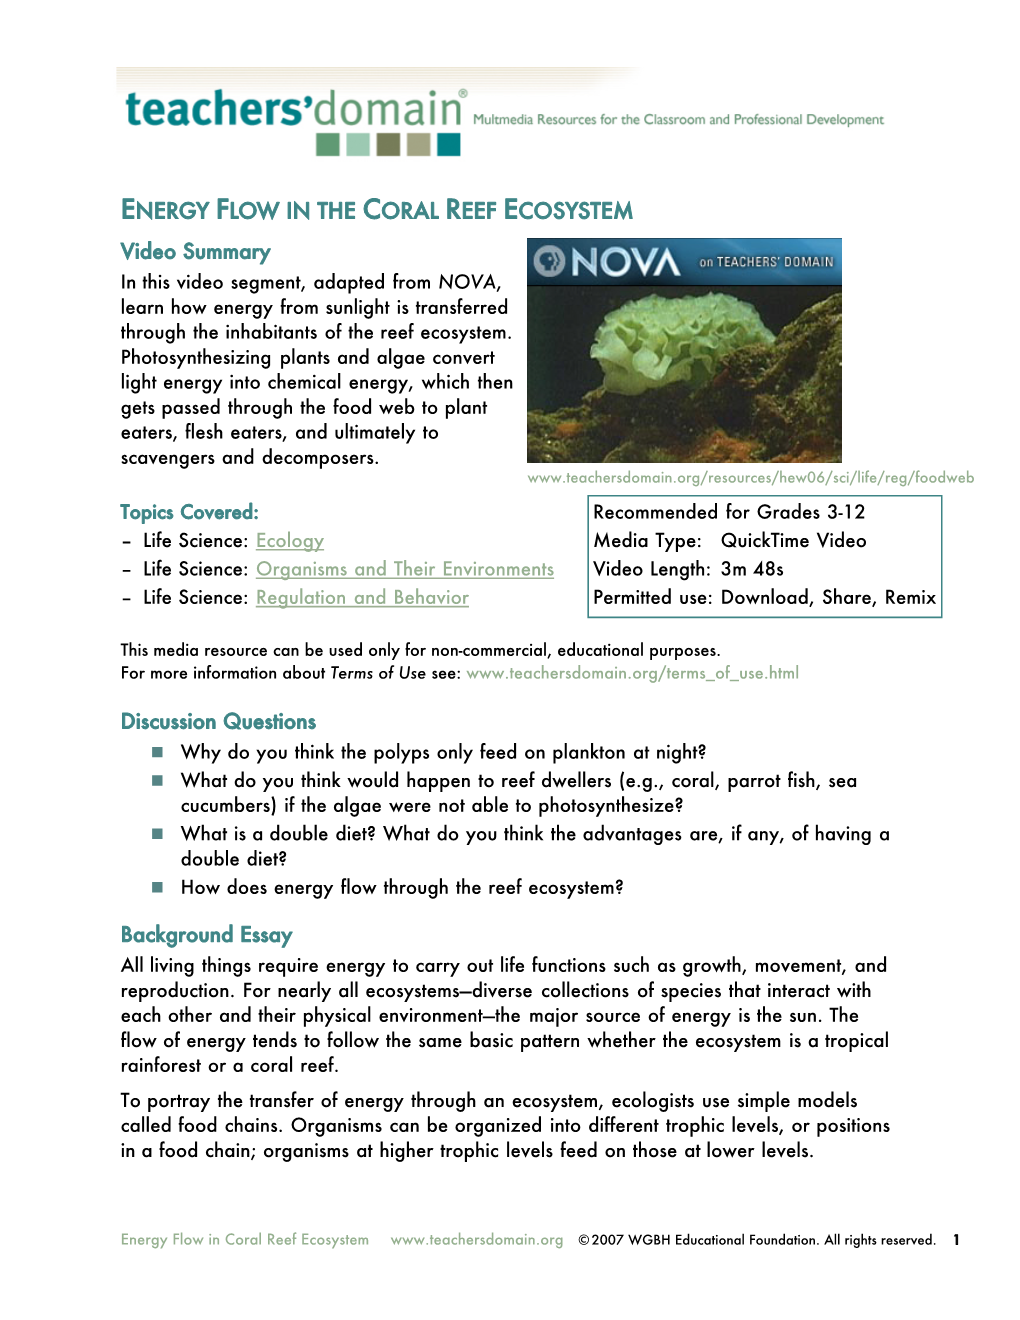 Energy Flow in the Coral Reef Ecosystem